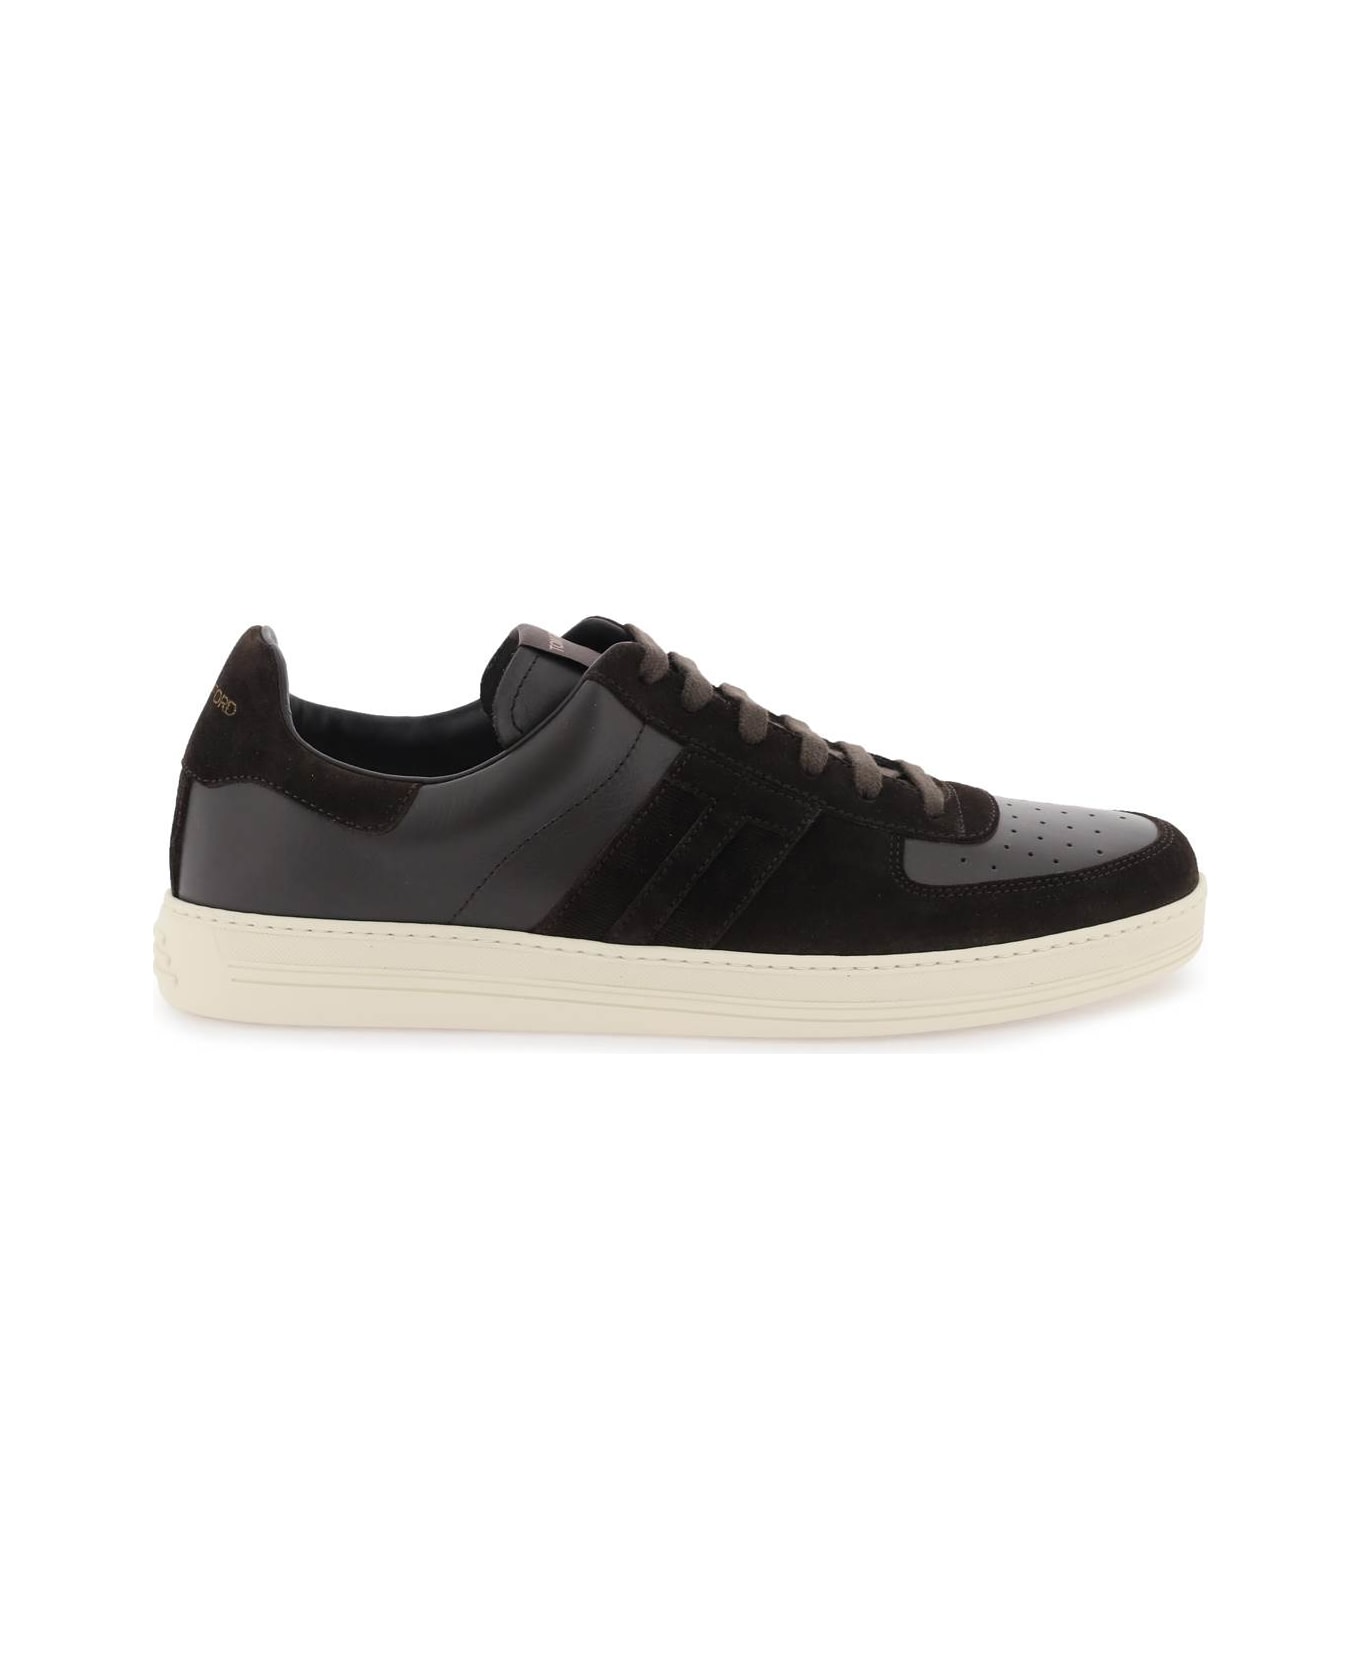 Tom Ford Suede And Leather 'radcliffe' Sneakers - BROWN CREAM (Brown)